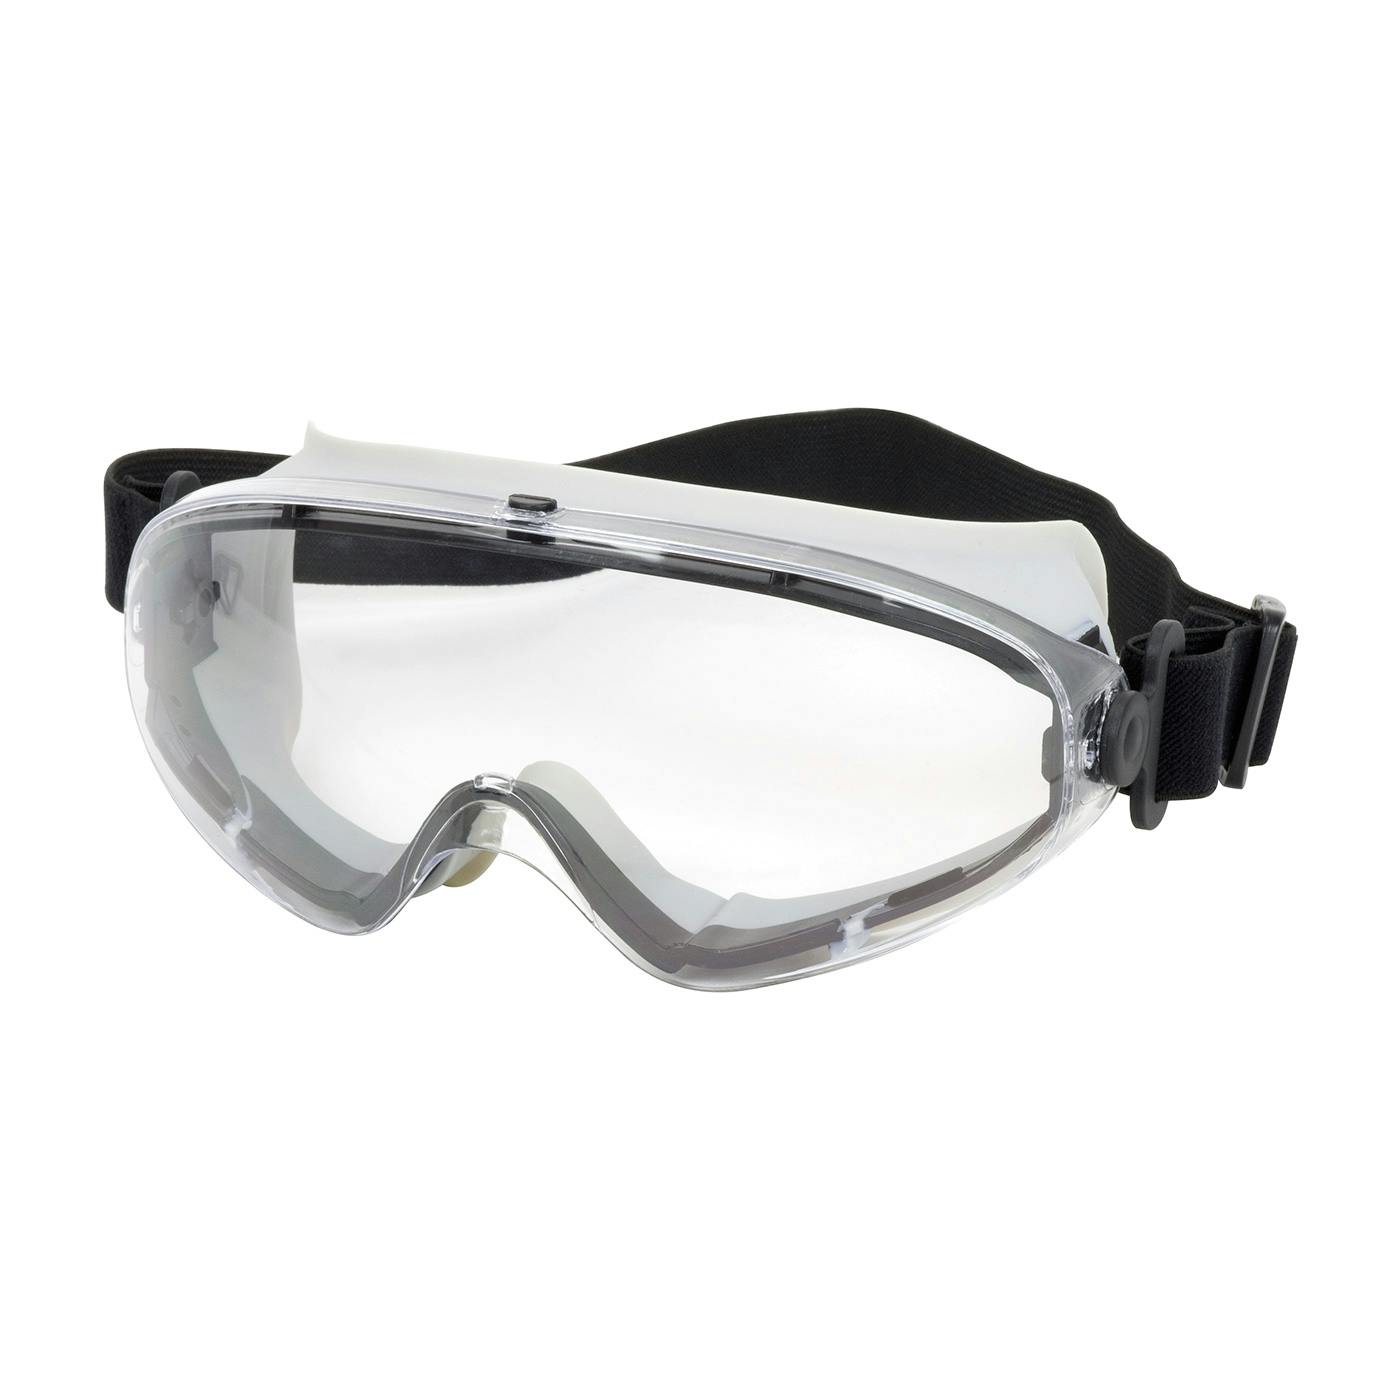 Indirect Vent Goggle with Light Gray Body, Clear Lens and Anti-Scratch / Anti-Fog Coating - Non-Latex Strap, Gray (251-80-0020) - OS